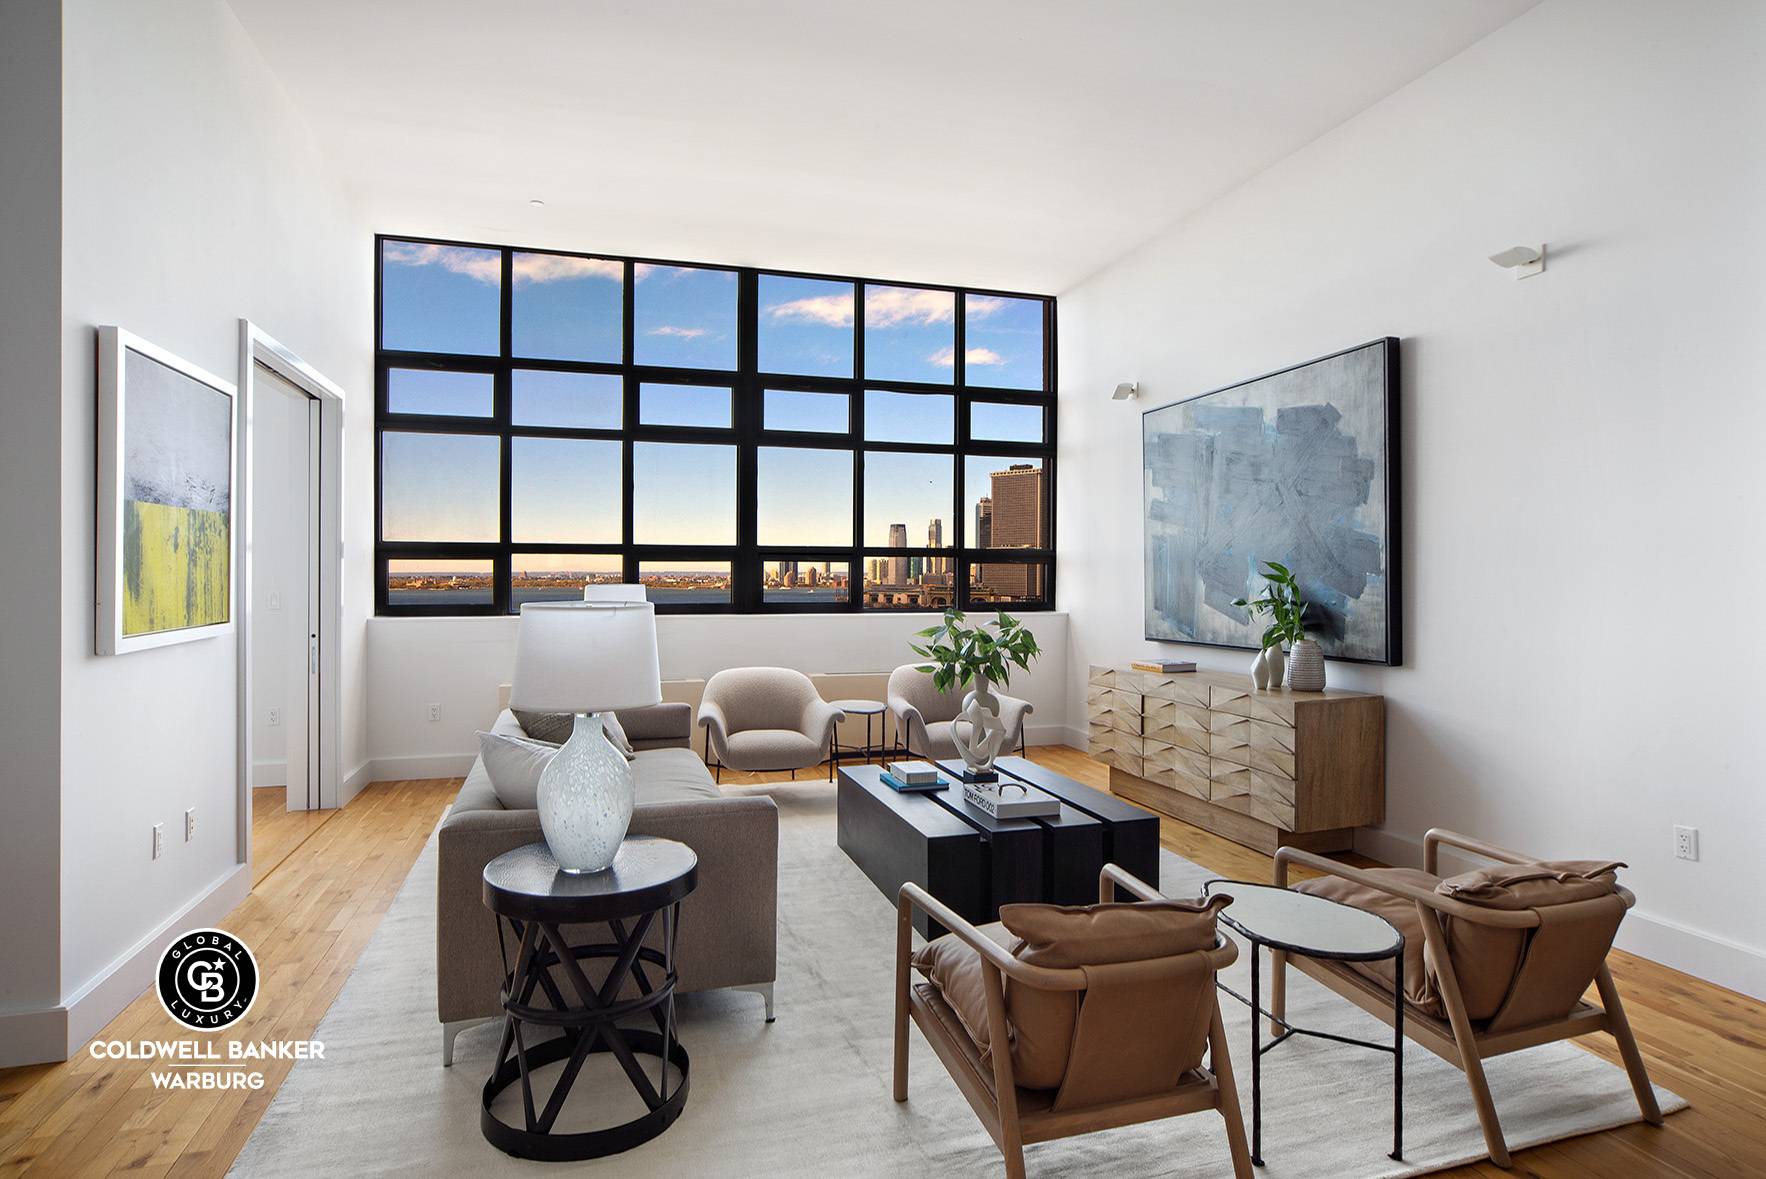 Unique opportunity to create a 2405 square foot, three bedroom, three bathroom plus home office and den media room apartment with all major rooms looking West onto New York Harbor, ...